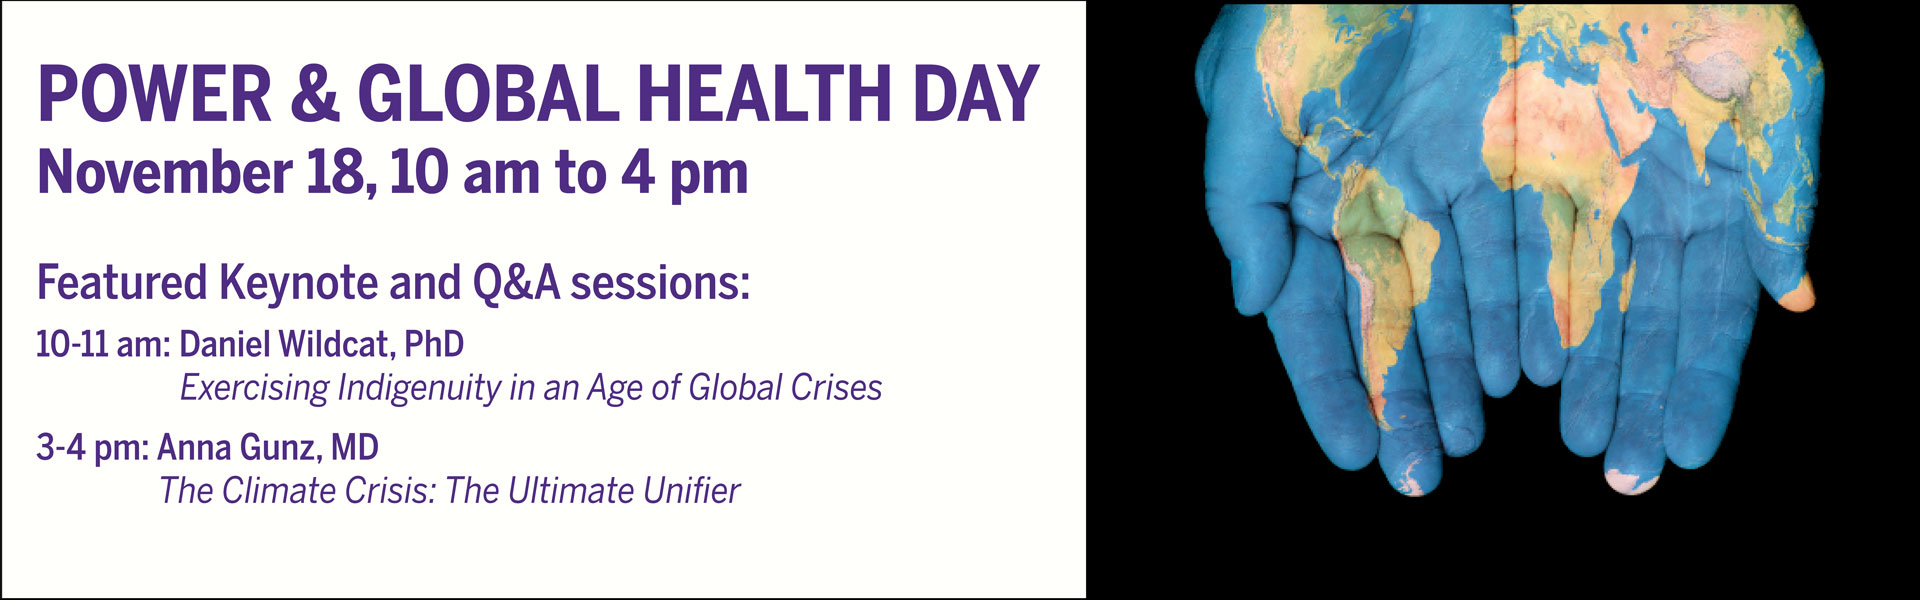 Power and Global Health day banner with two hands outstretched, palms up, with a map of the world painted in the palms. Text on the banner: Power and global health day, November 18 from 10 am to 4 pm, Featured keynote and Q&A sessions: 10-11am: Daniel Wildcat, PhD Exercising indigenuity in and age of global crises, 3-4pm: Anna Gunz, PhD, the climate crisis: the ultimate unifier